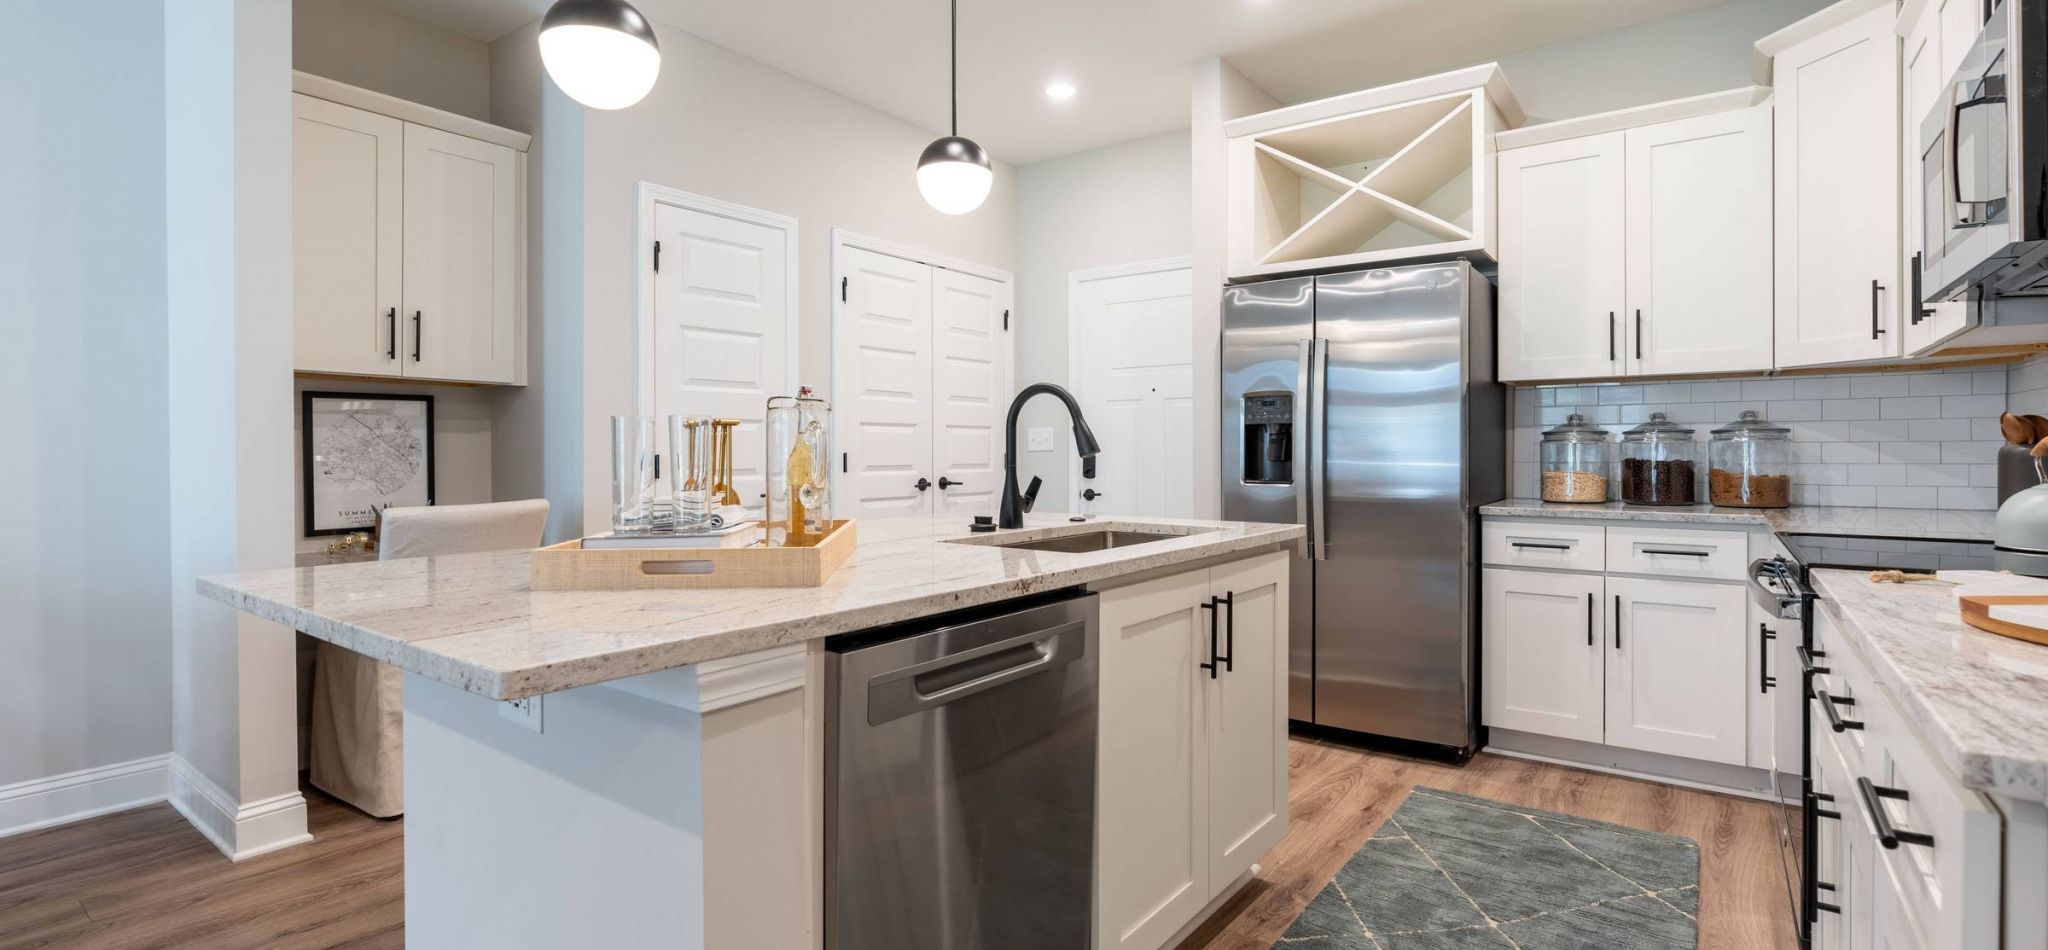 Hawthorne at Summerville modern apartment kitchen with kitchen island, granite countertops, stainless steel appliances, 9ft ceilings